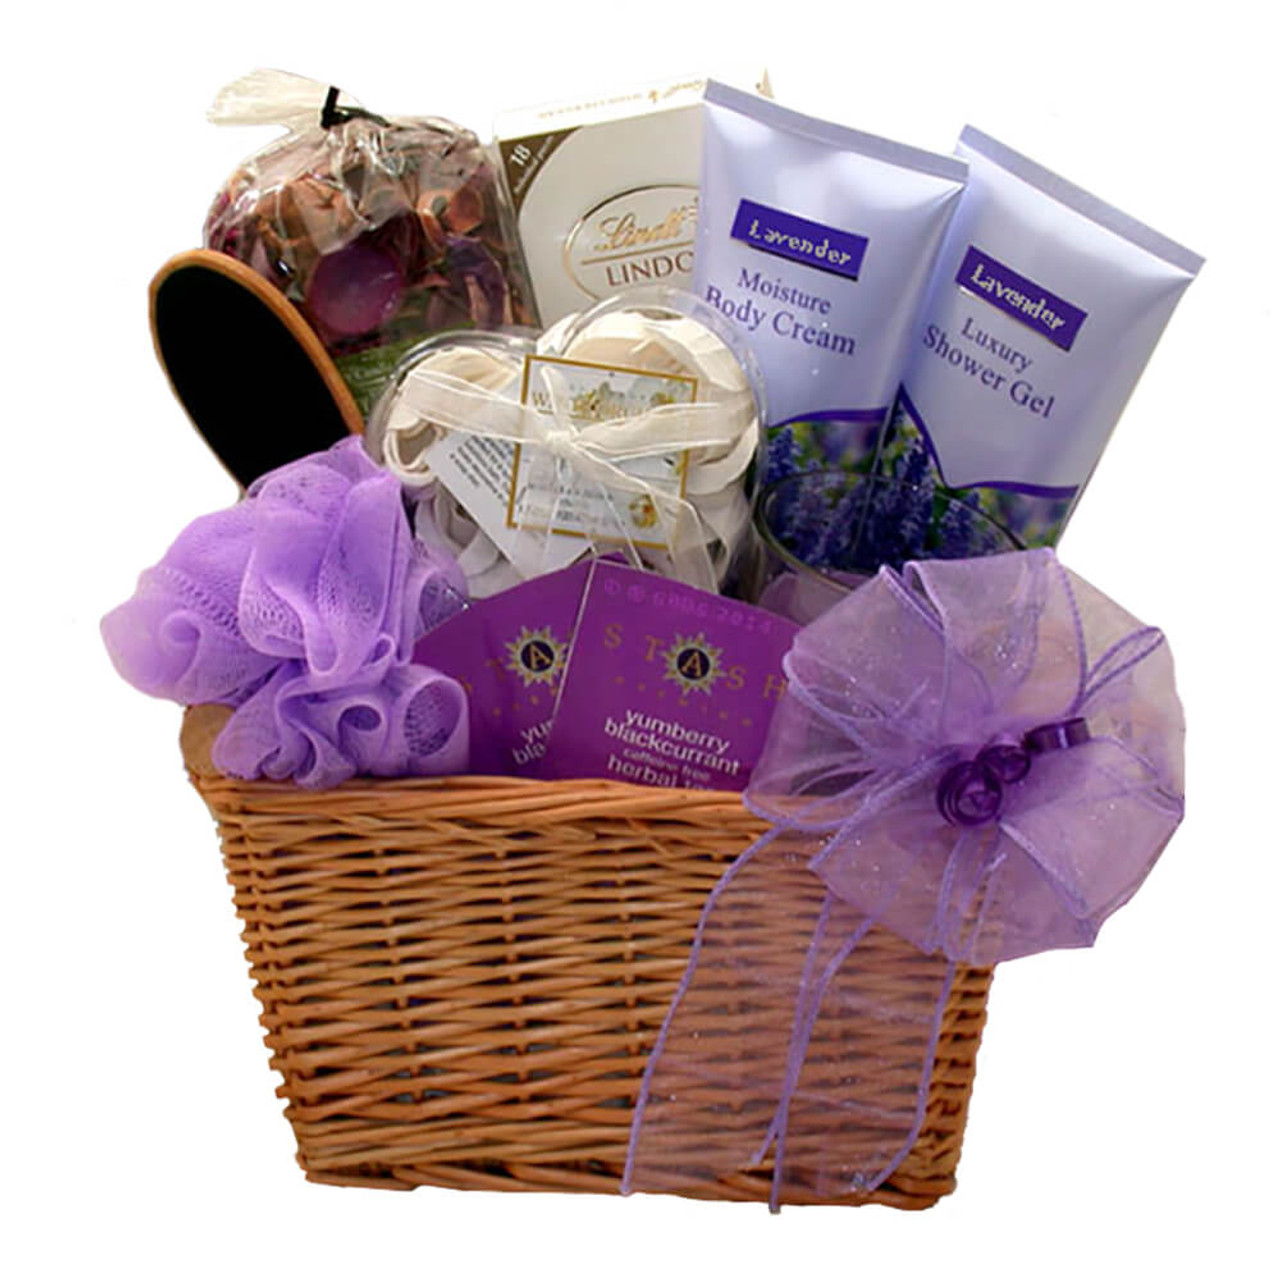 Spa Gift Baskets for Women - Lavender Bath Gift Sets for Women- 11pcs with  Bubble Bath, Shower Gel, Body Lotion, Bath Bombs, Essential Oil, Green